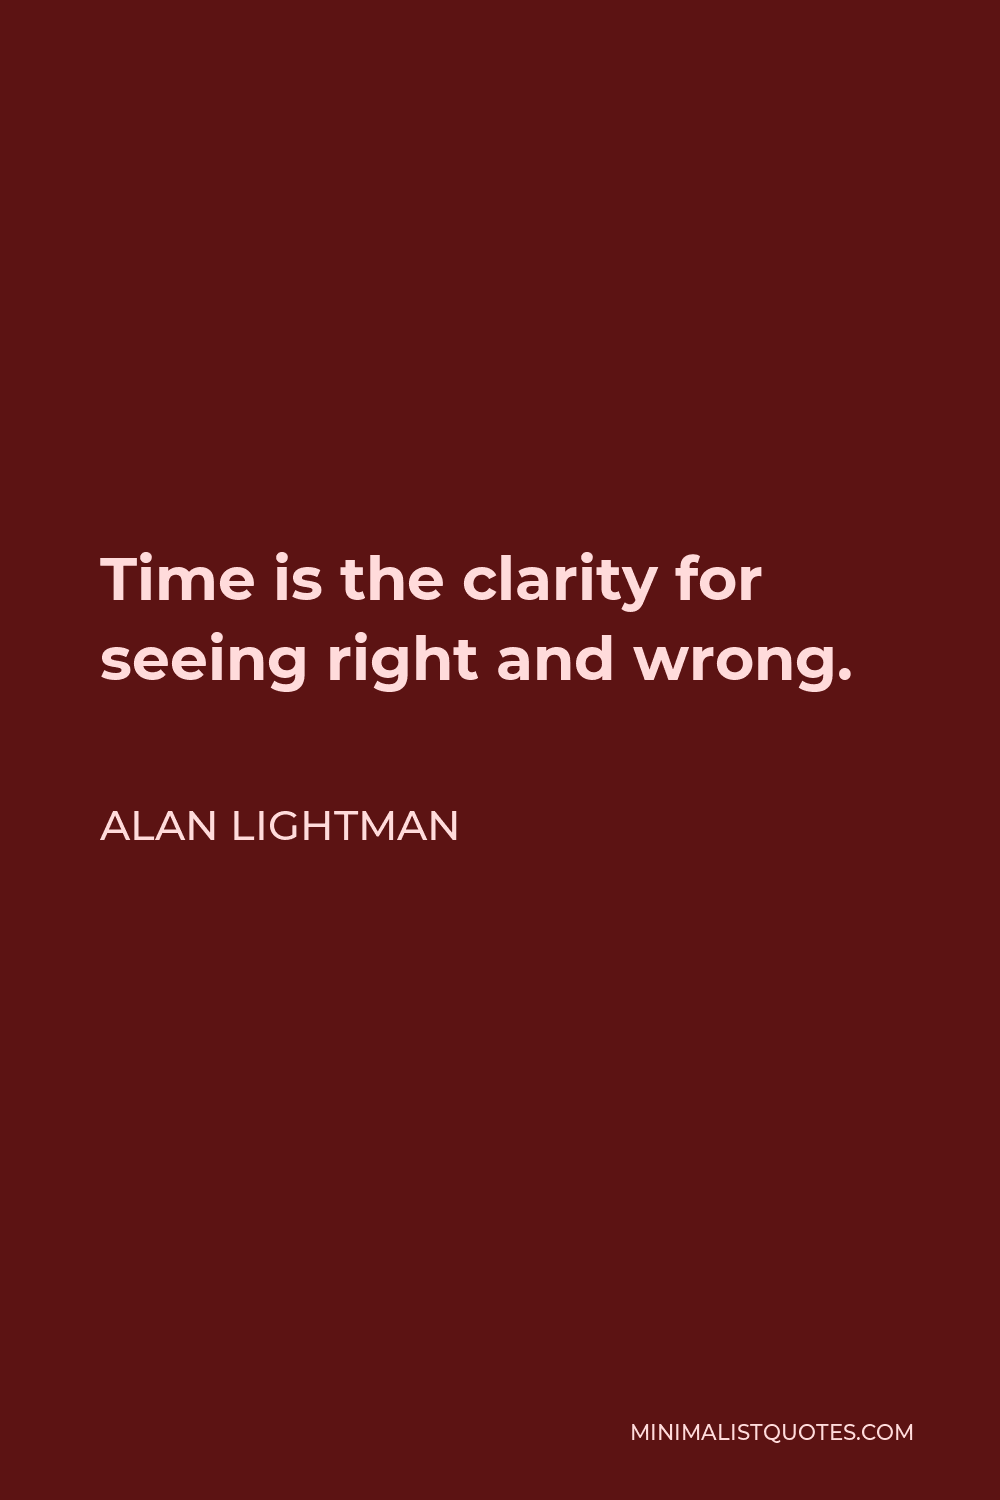 Alan Lightman Quote - Time is the clarity for seeing right and wrong.